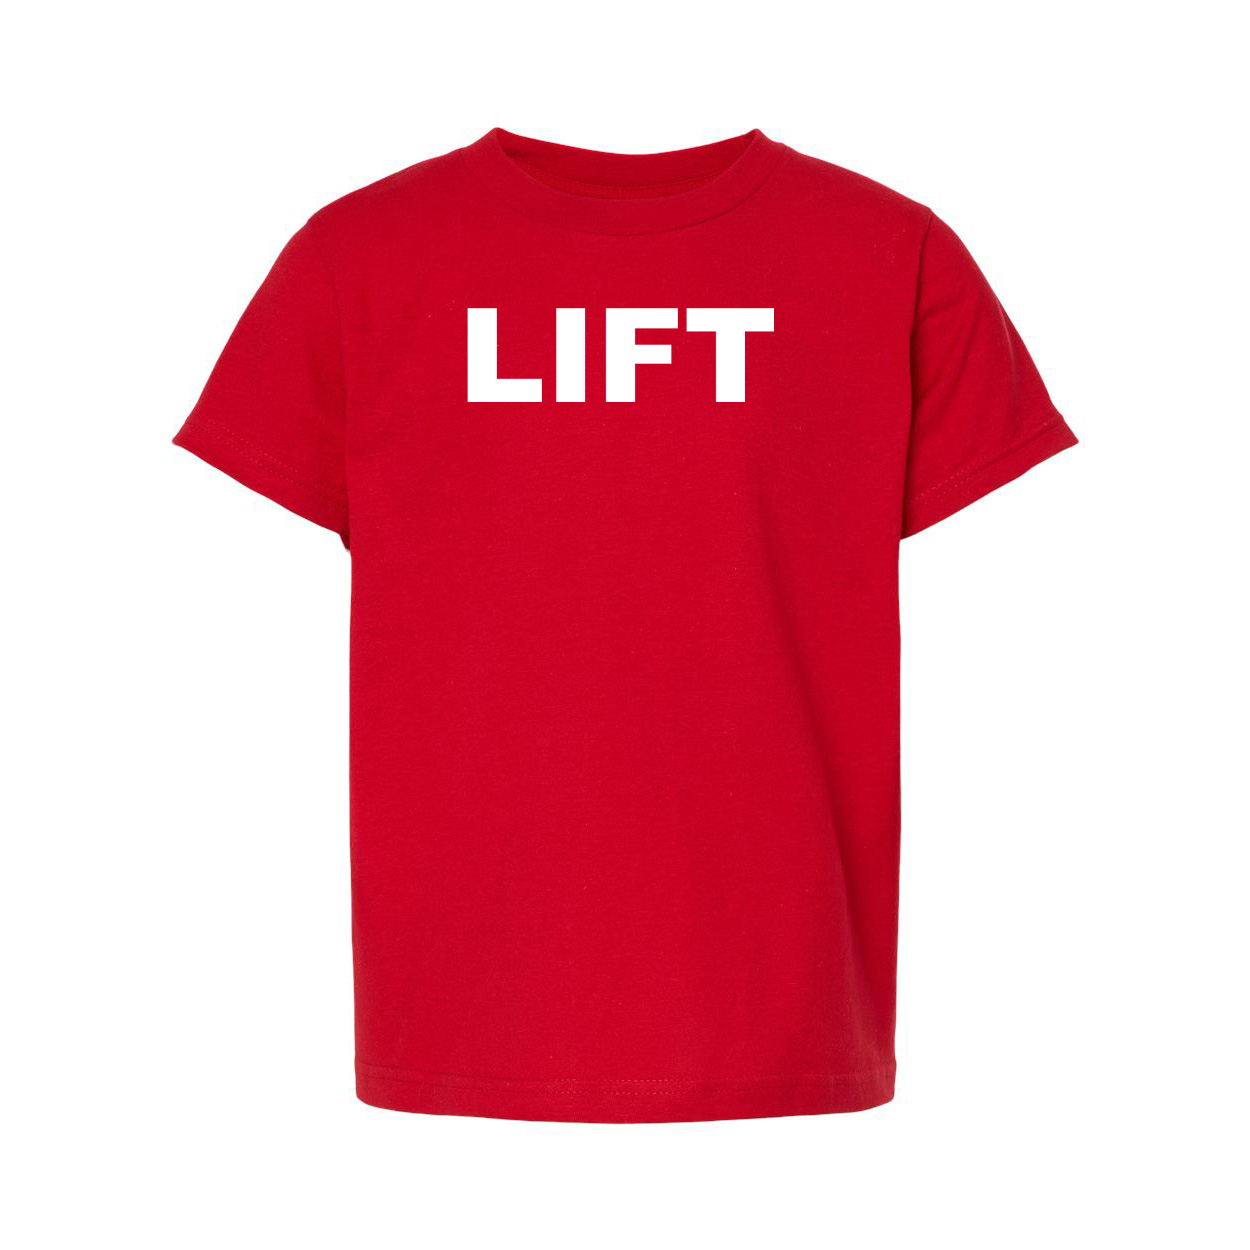 Lift Brand Logo Classic Youth Unisex T-Shirt Red 